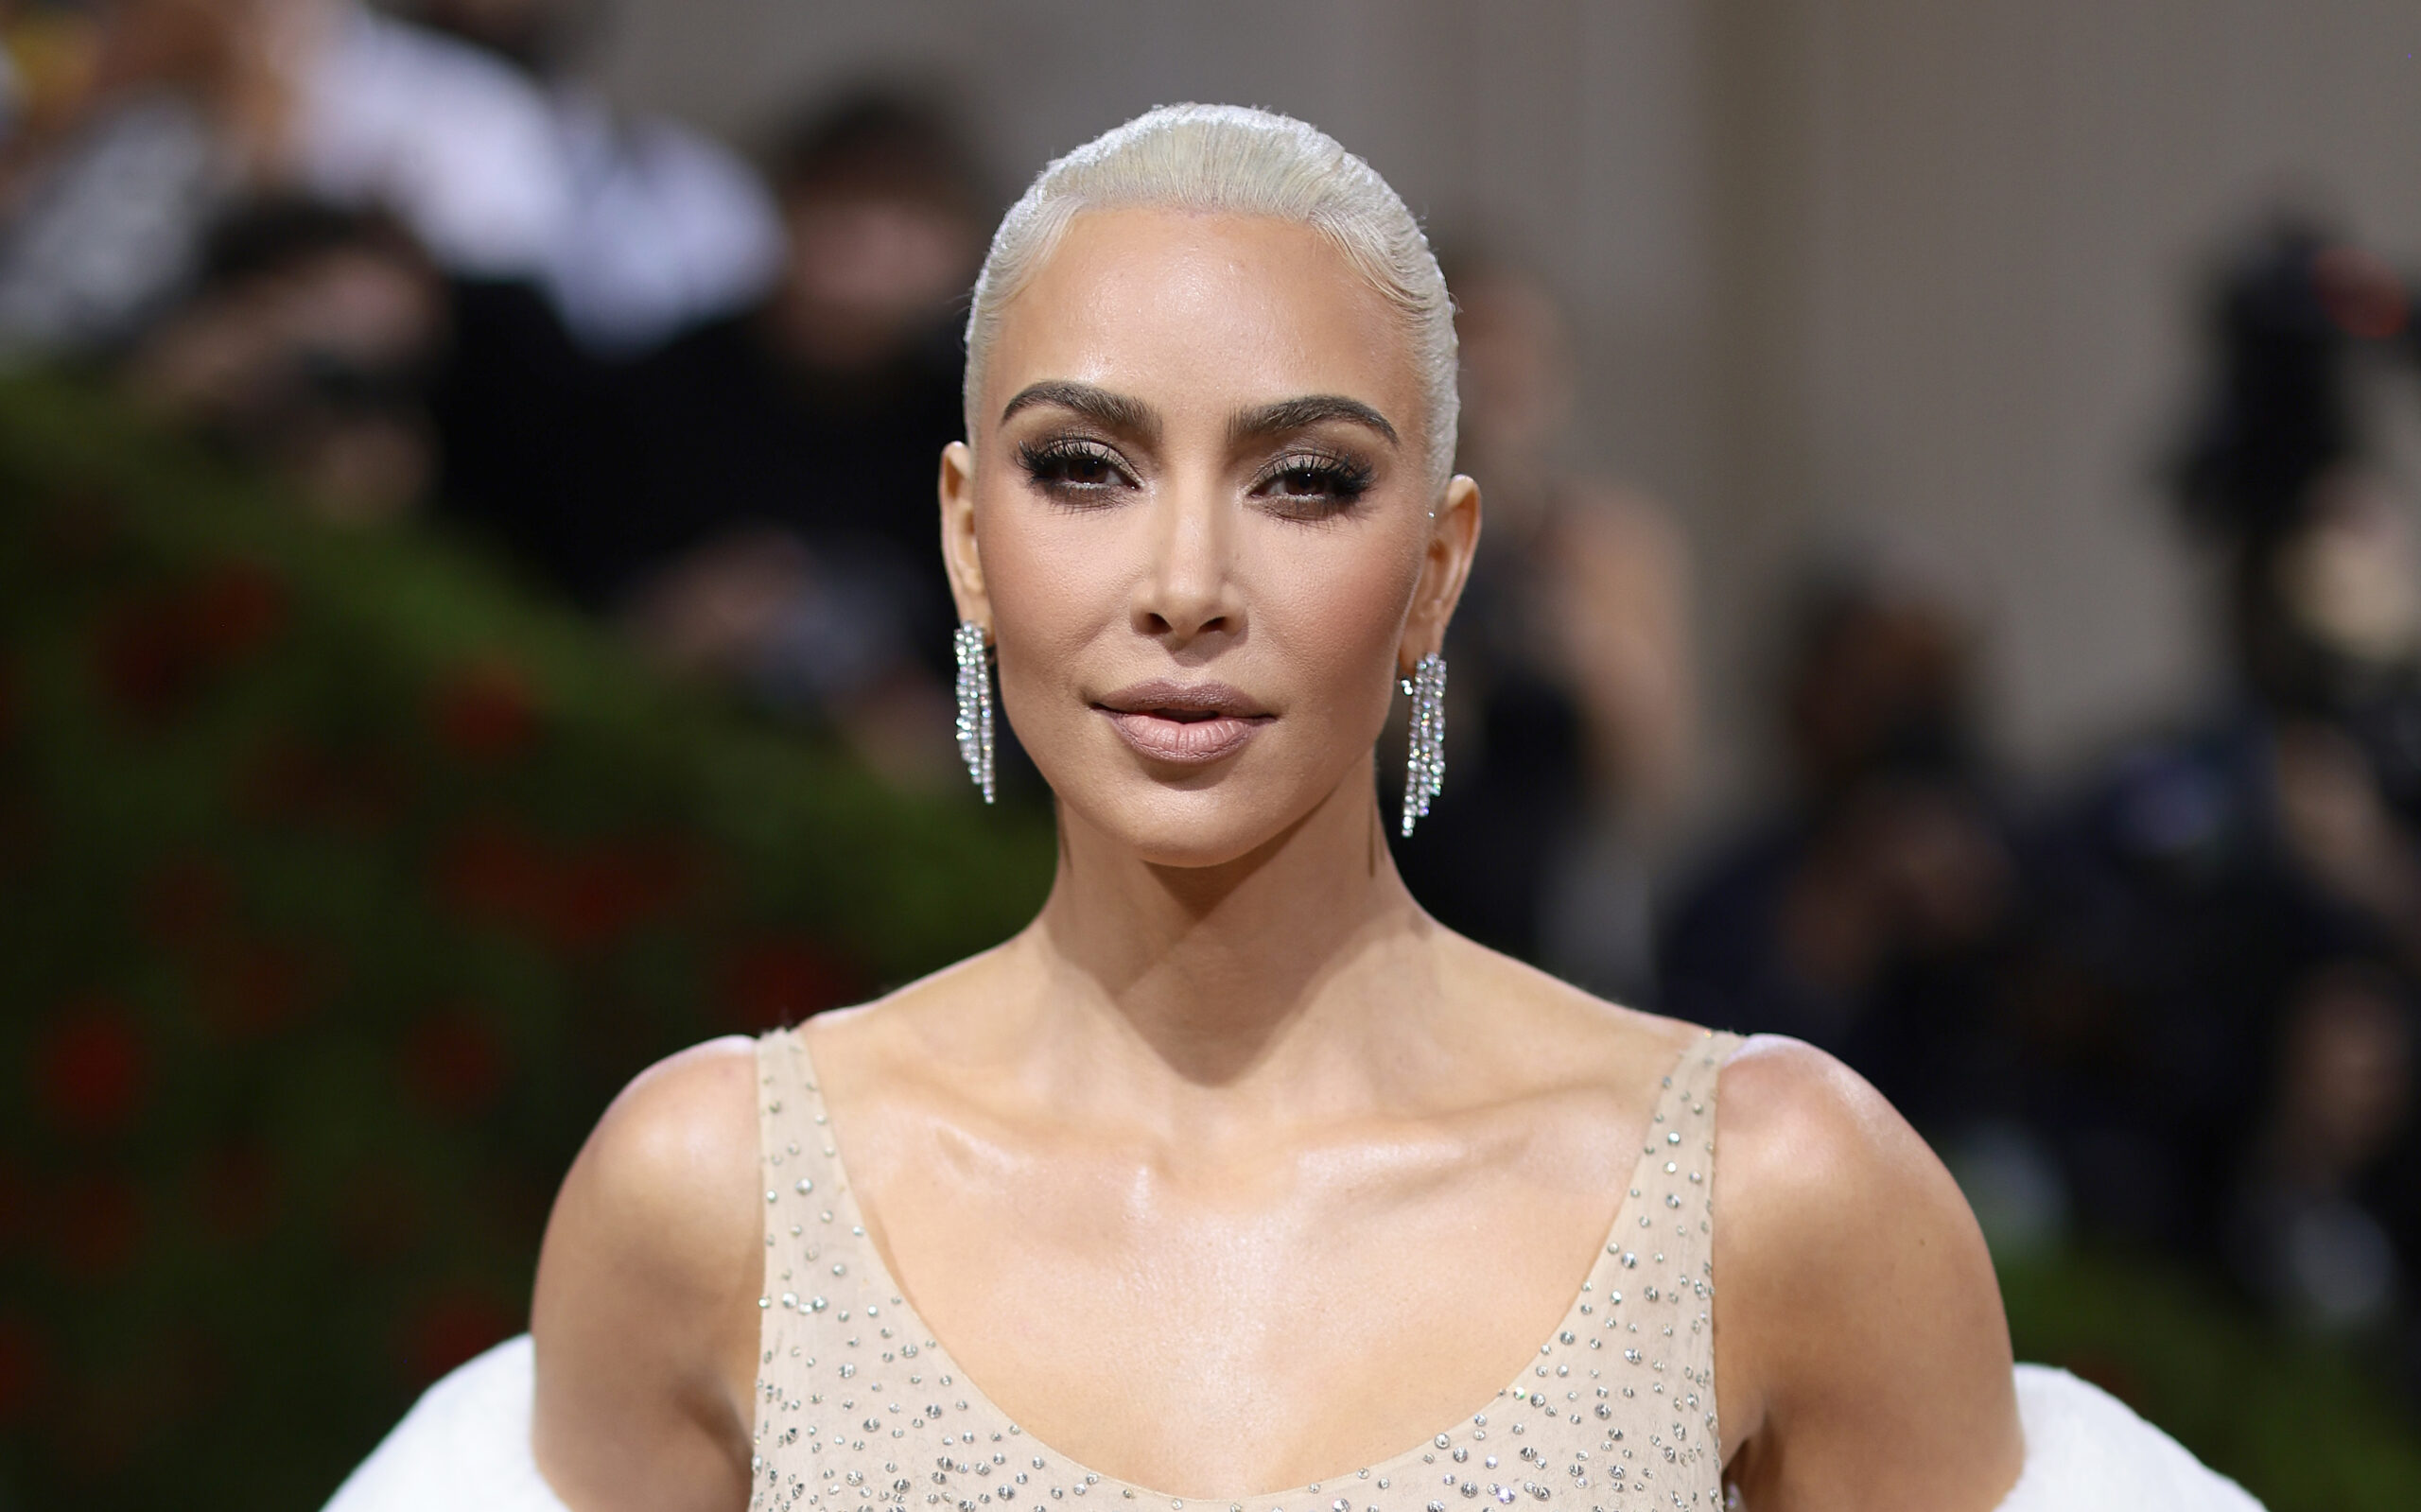 Kim Kardashian Tells New York Times She’d Be Willing to ‘Eat Poop Every Single Day’ to ‘Look Younger’